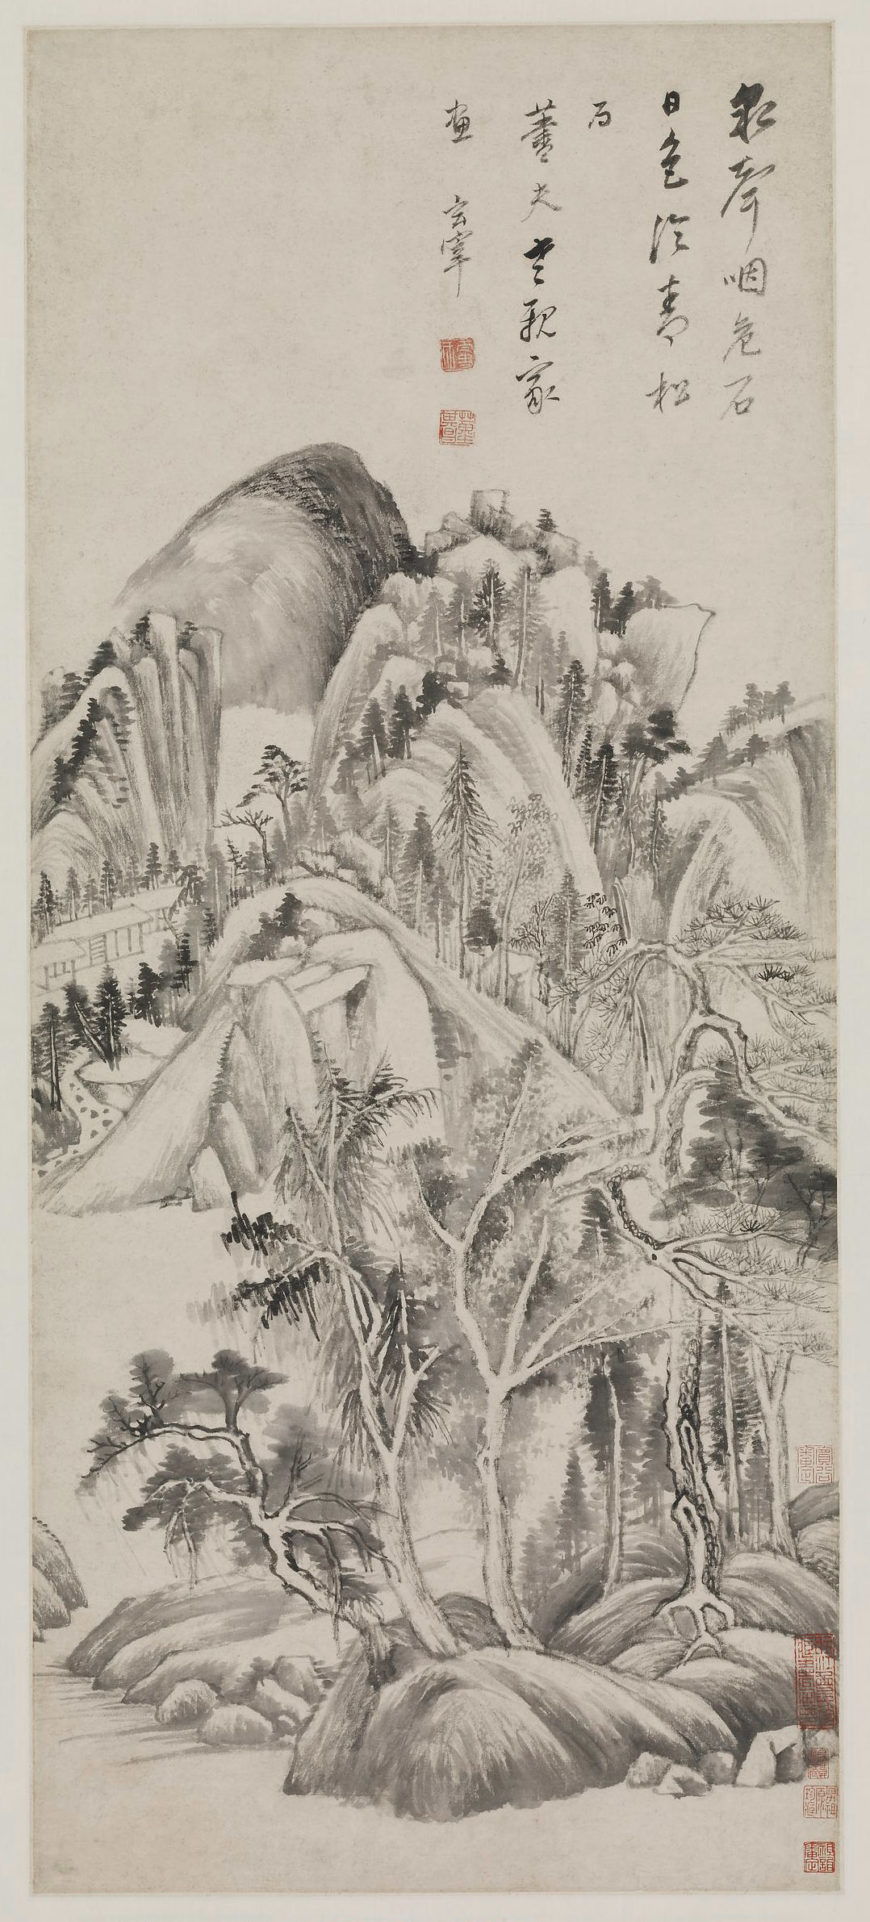 Dong Qichang 董其昌, Landscape, Ming dynasty, China, 95.5 x 41 cm (© The Trustees of the British Museum)